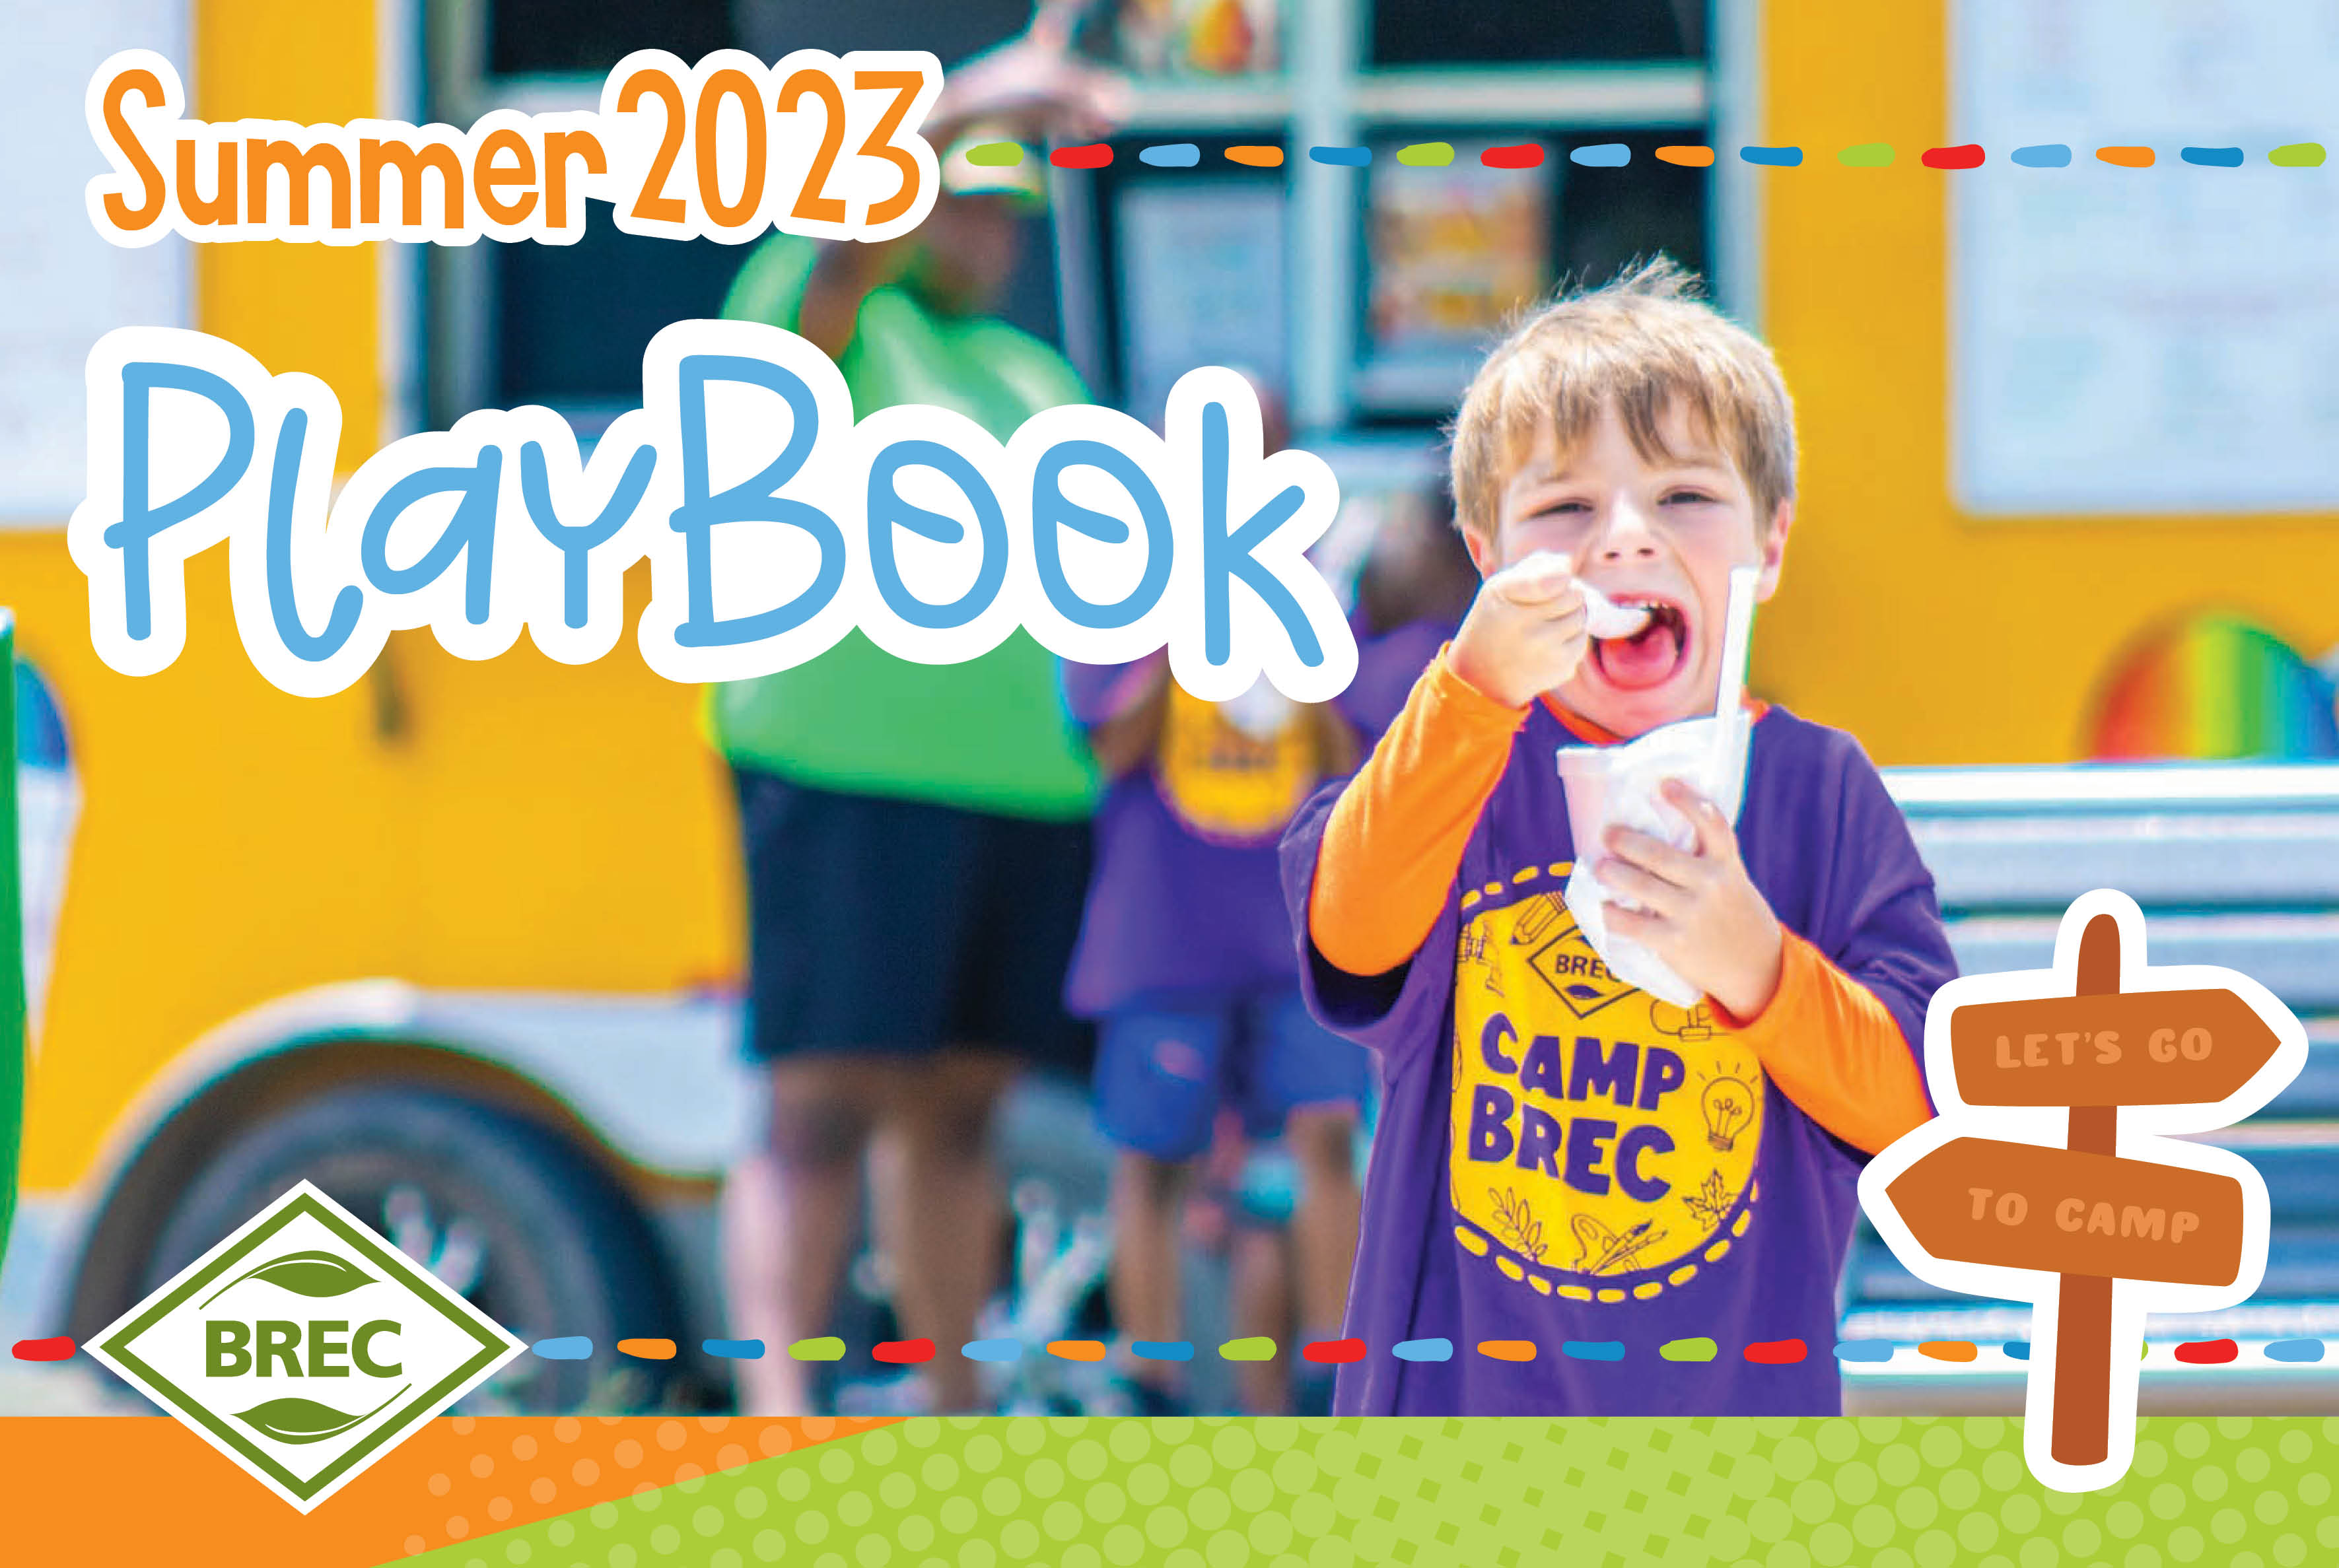 Photo of little boy eating a snowball standing in a park with "Summer 2023 Playbook" overlay